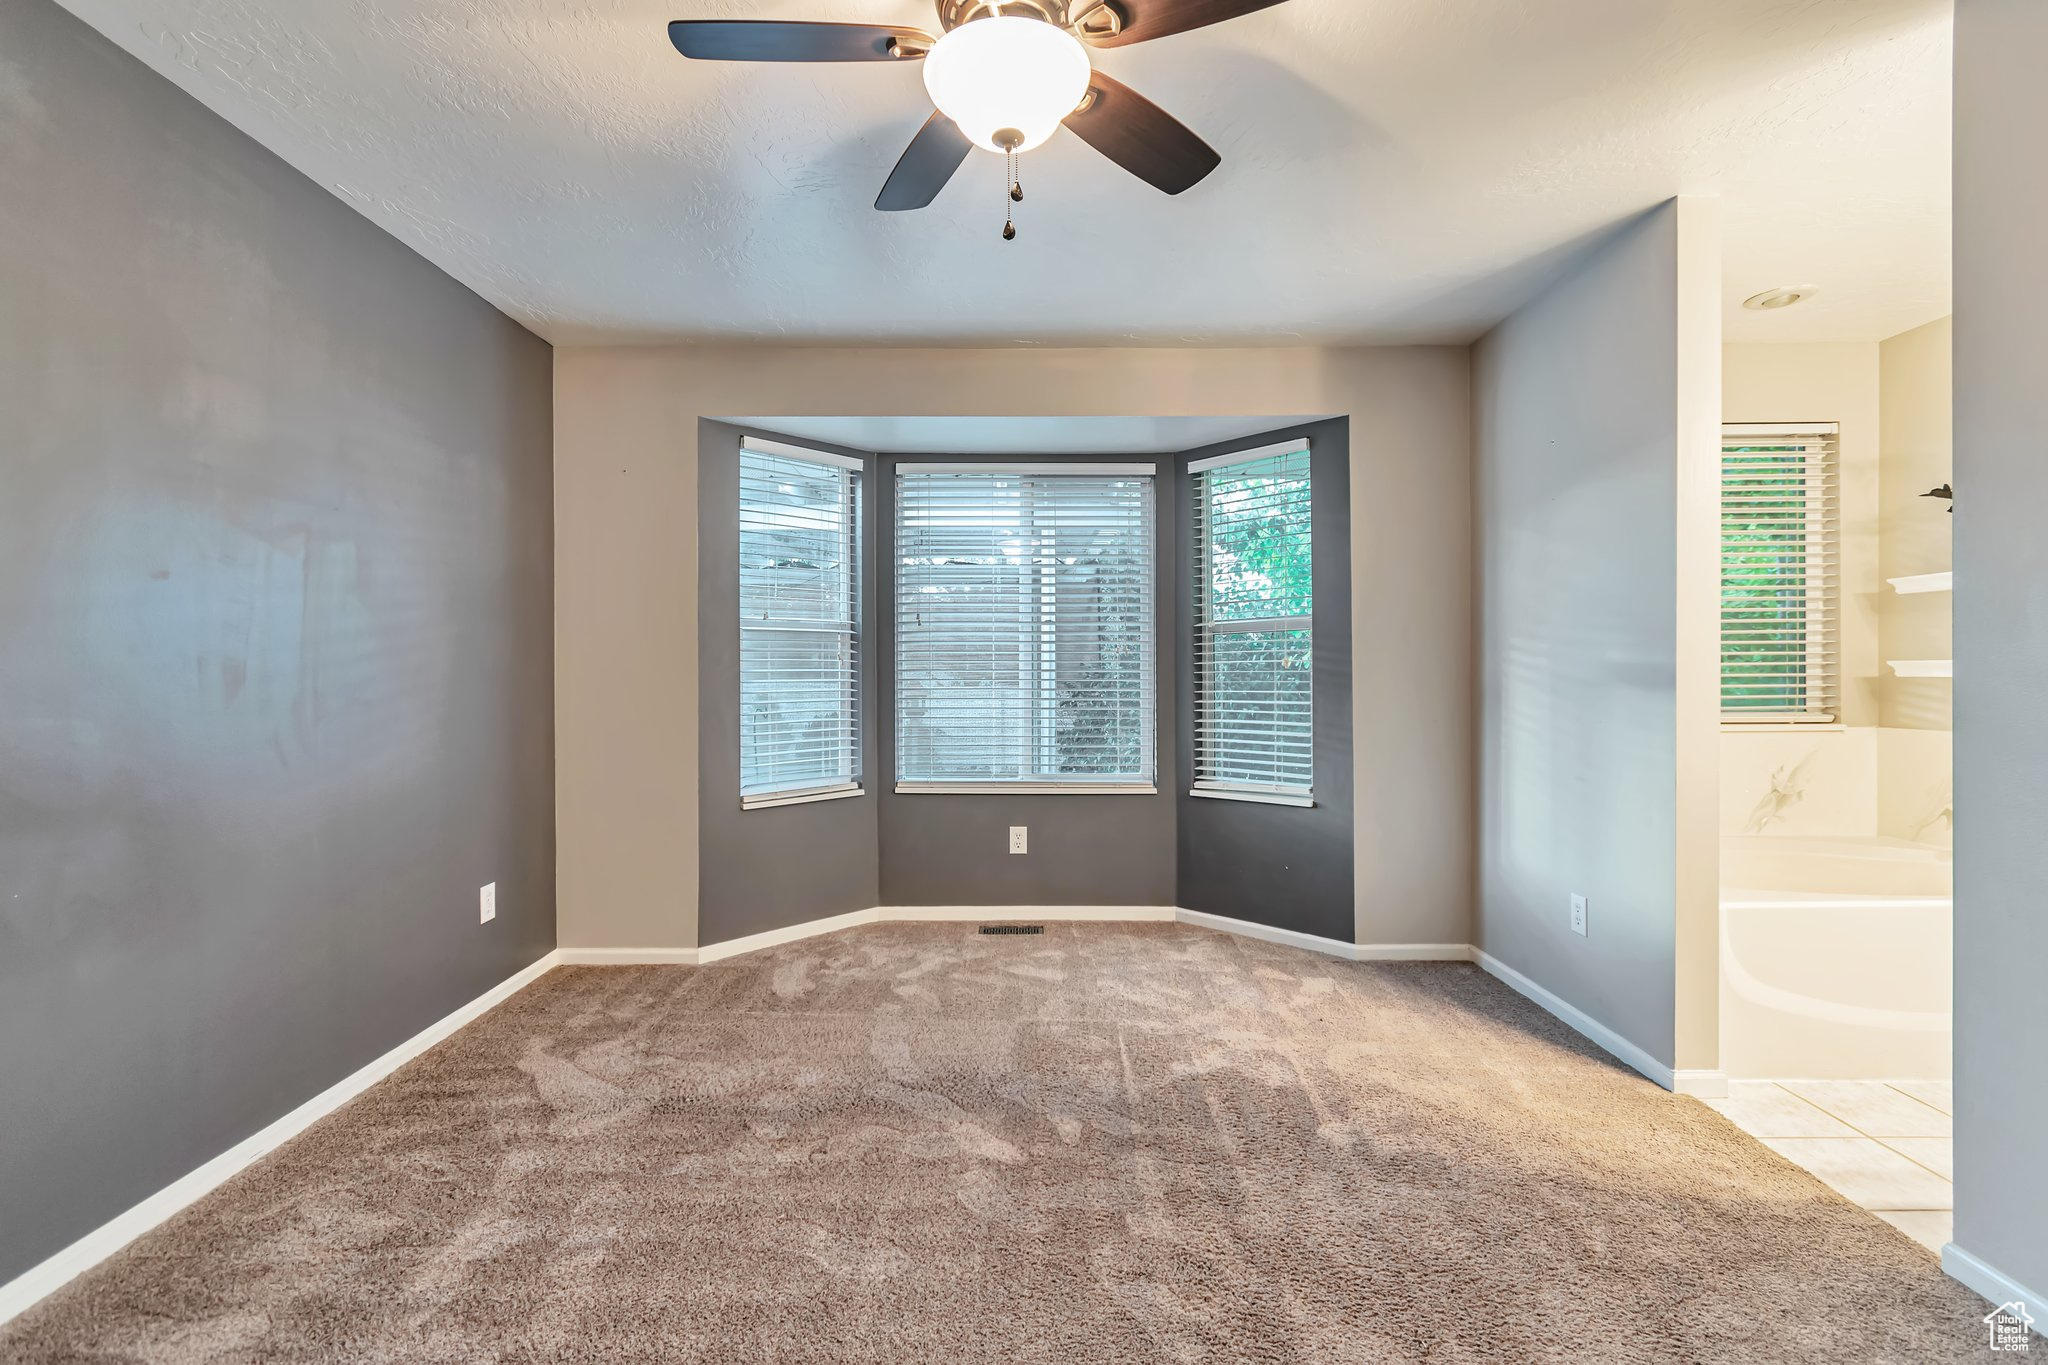 Master bedroom with ensuite bathroom, carpeted with large lookout windows, walk-in closet.